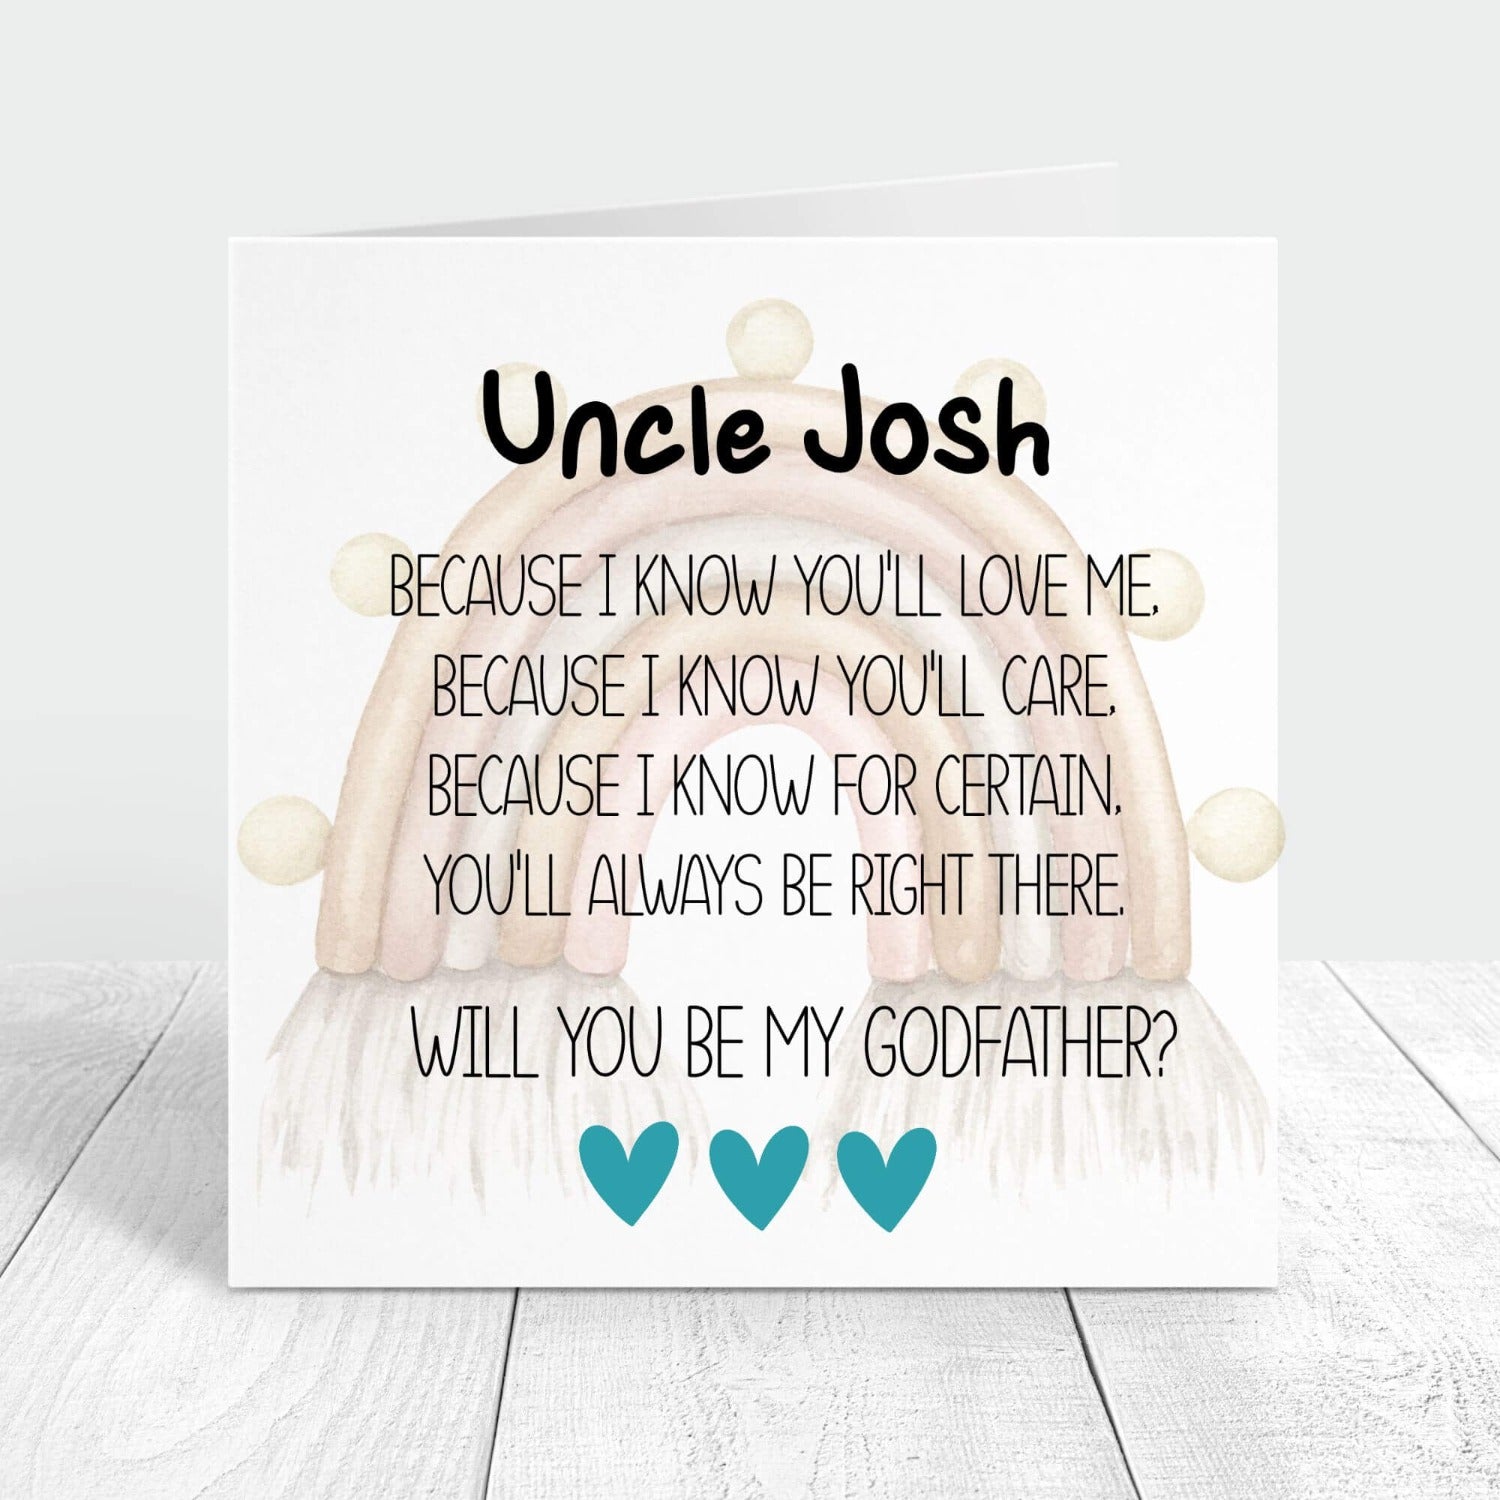 Will you be my godfather personalised card with poem